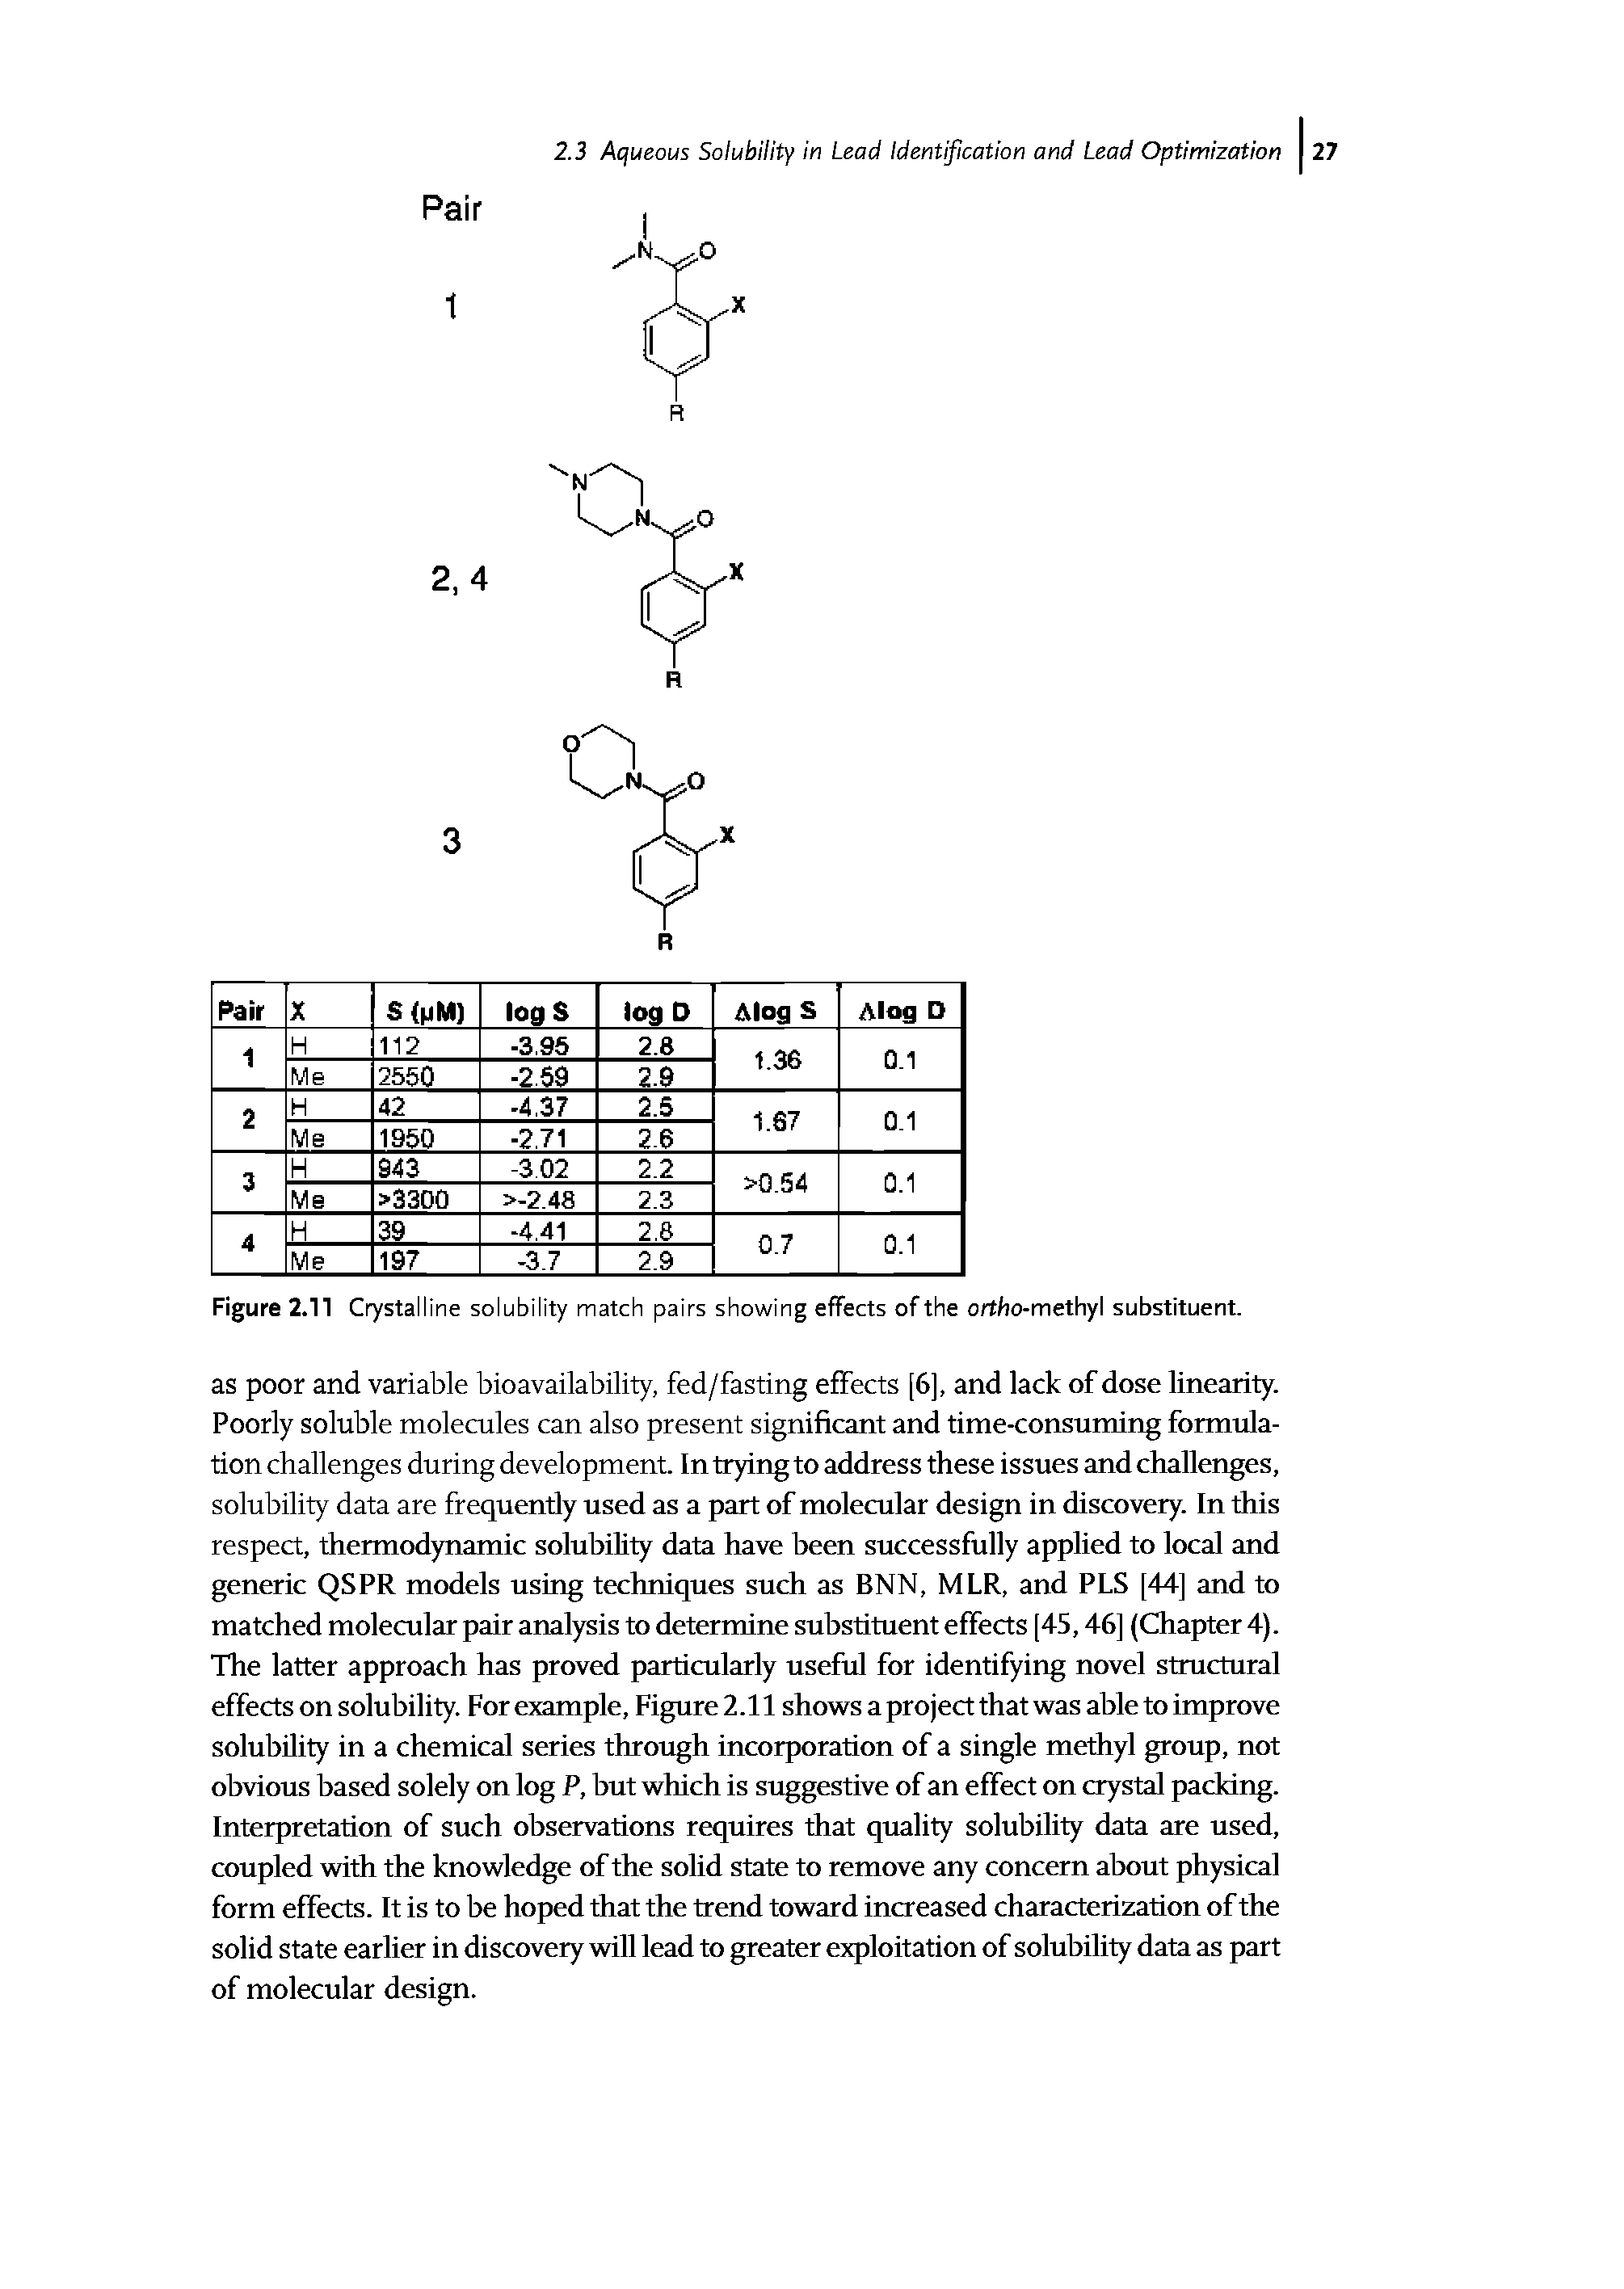 Figure 2.11 Crystalline solubility match pairs showing effects of the ortho-methyl substituent.